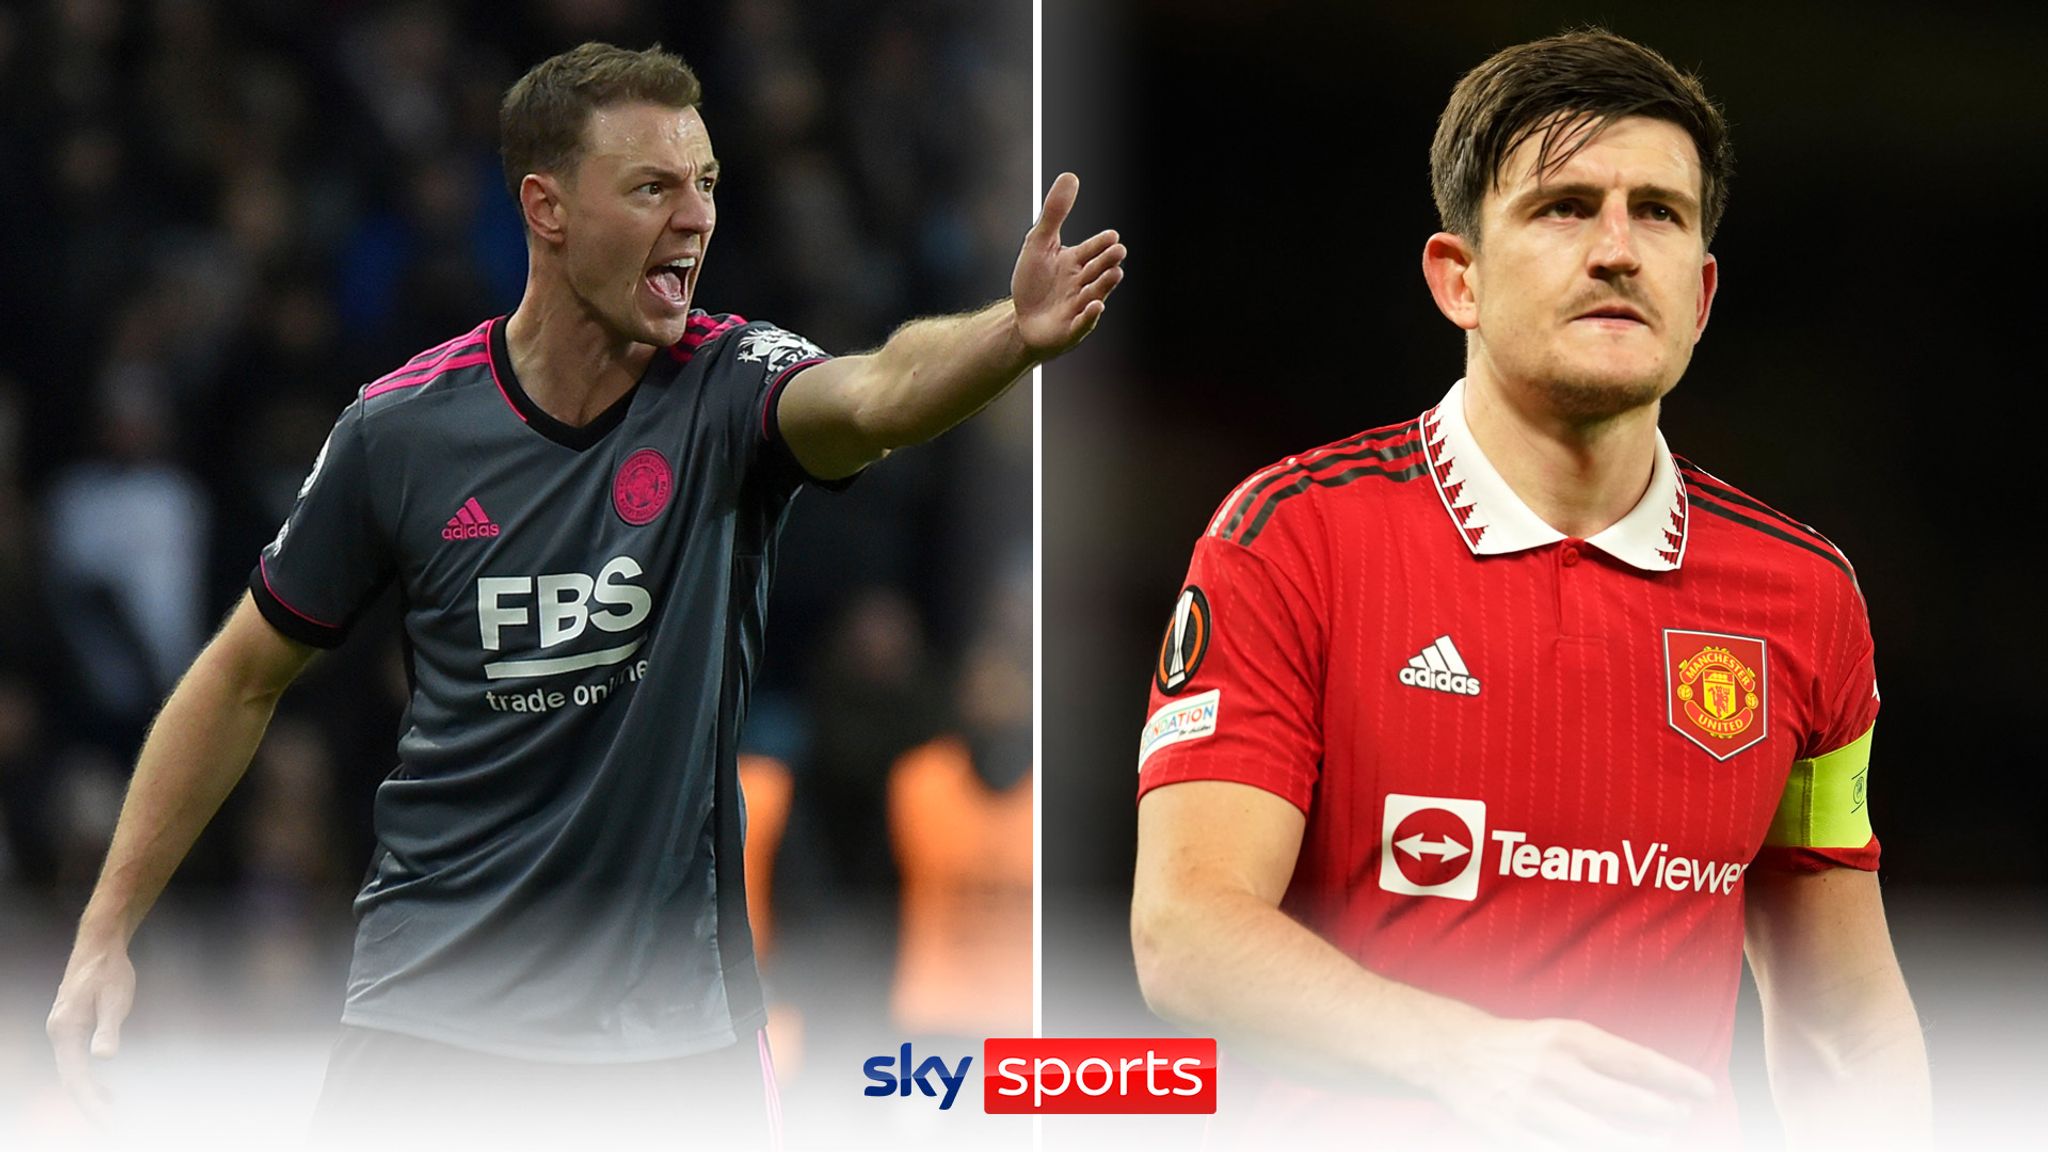 Manchester United transfers Could Jonny Evans signing impact Harry Maguires Manchester United future? Video Watch TV Show Sky Sports